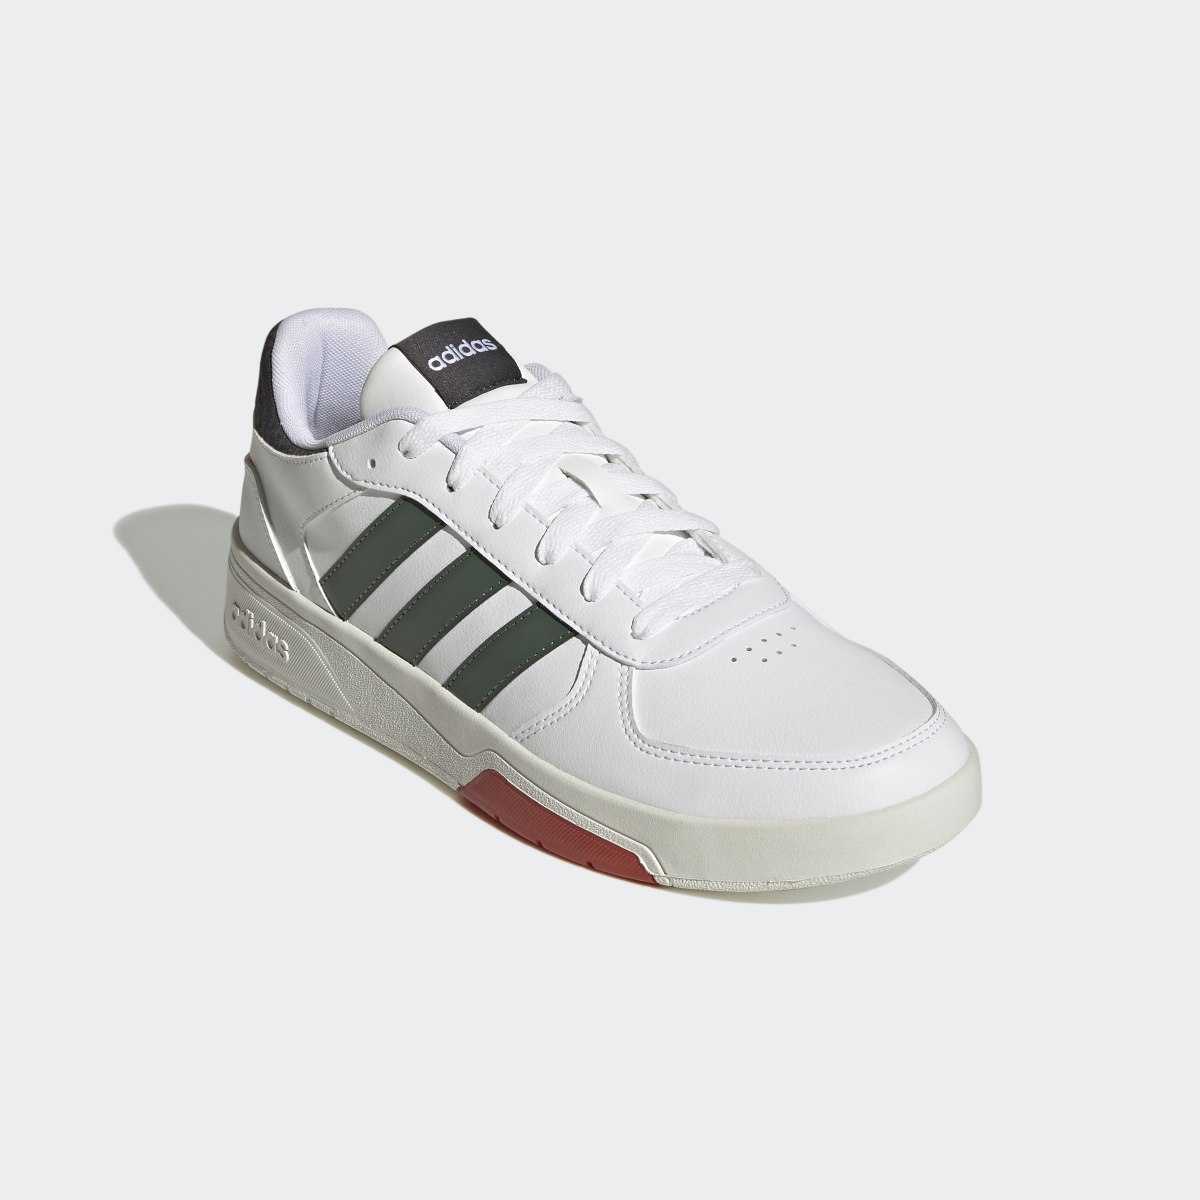 Adidas Chaussure CourtBeat Court Lifestyle. 5